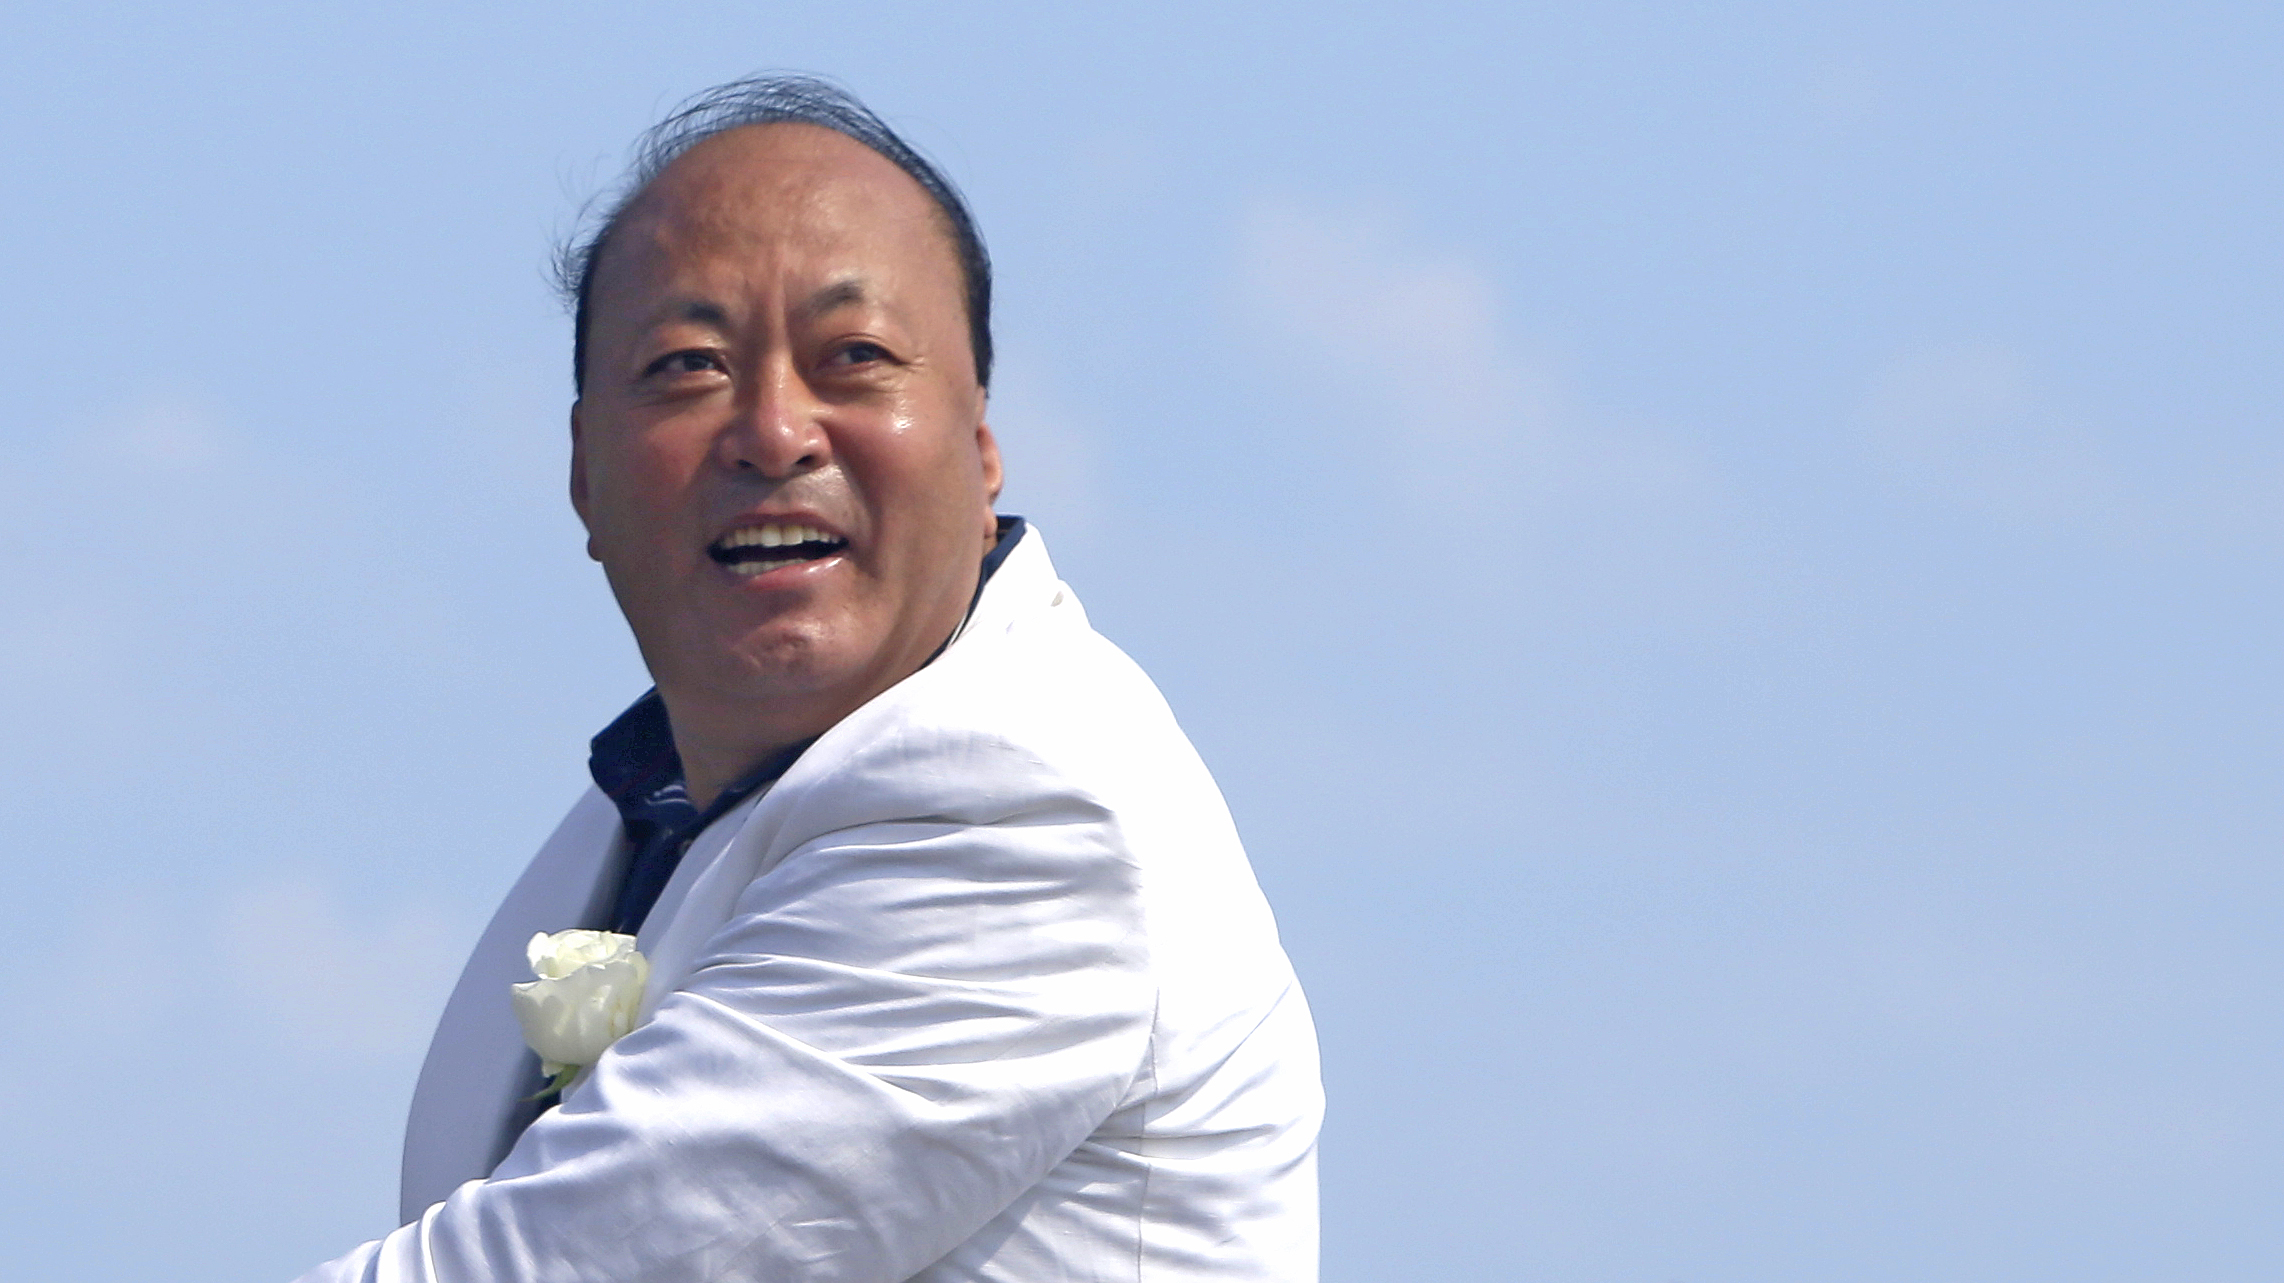 Chinese CEO of "Tiens" company Li Jinyuan poses during a parade on the Promenade des Anglais in Nice, southeastern France May 8, 2015